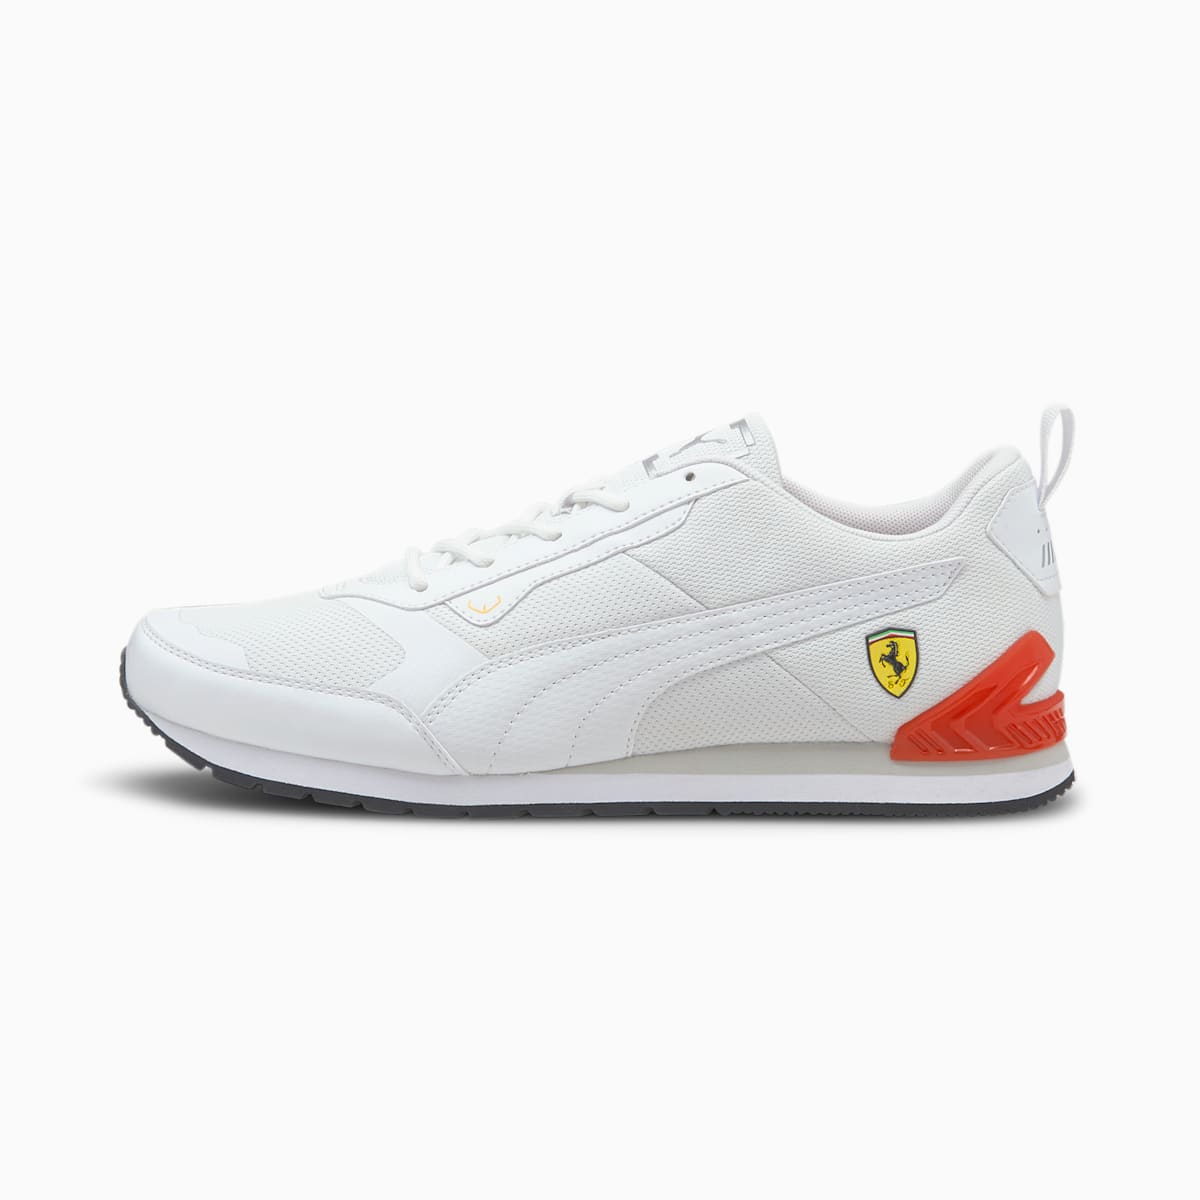 Sneakers - PUMA FERRARI MOTORSPORT TRACK RACER WHITE was sold for R650 ...